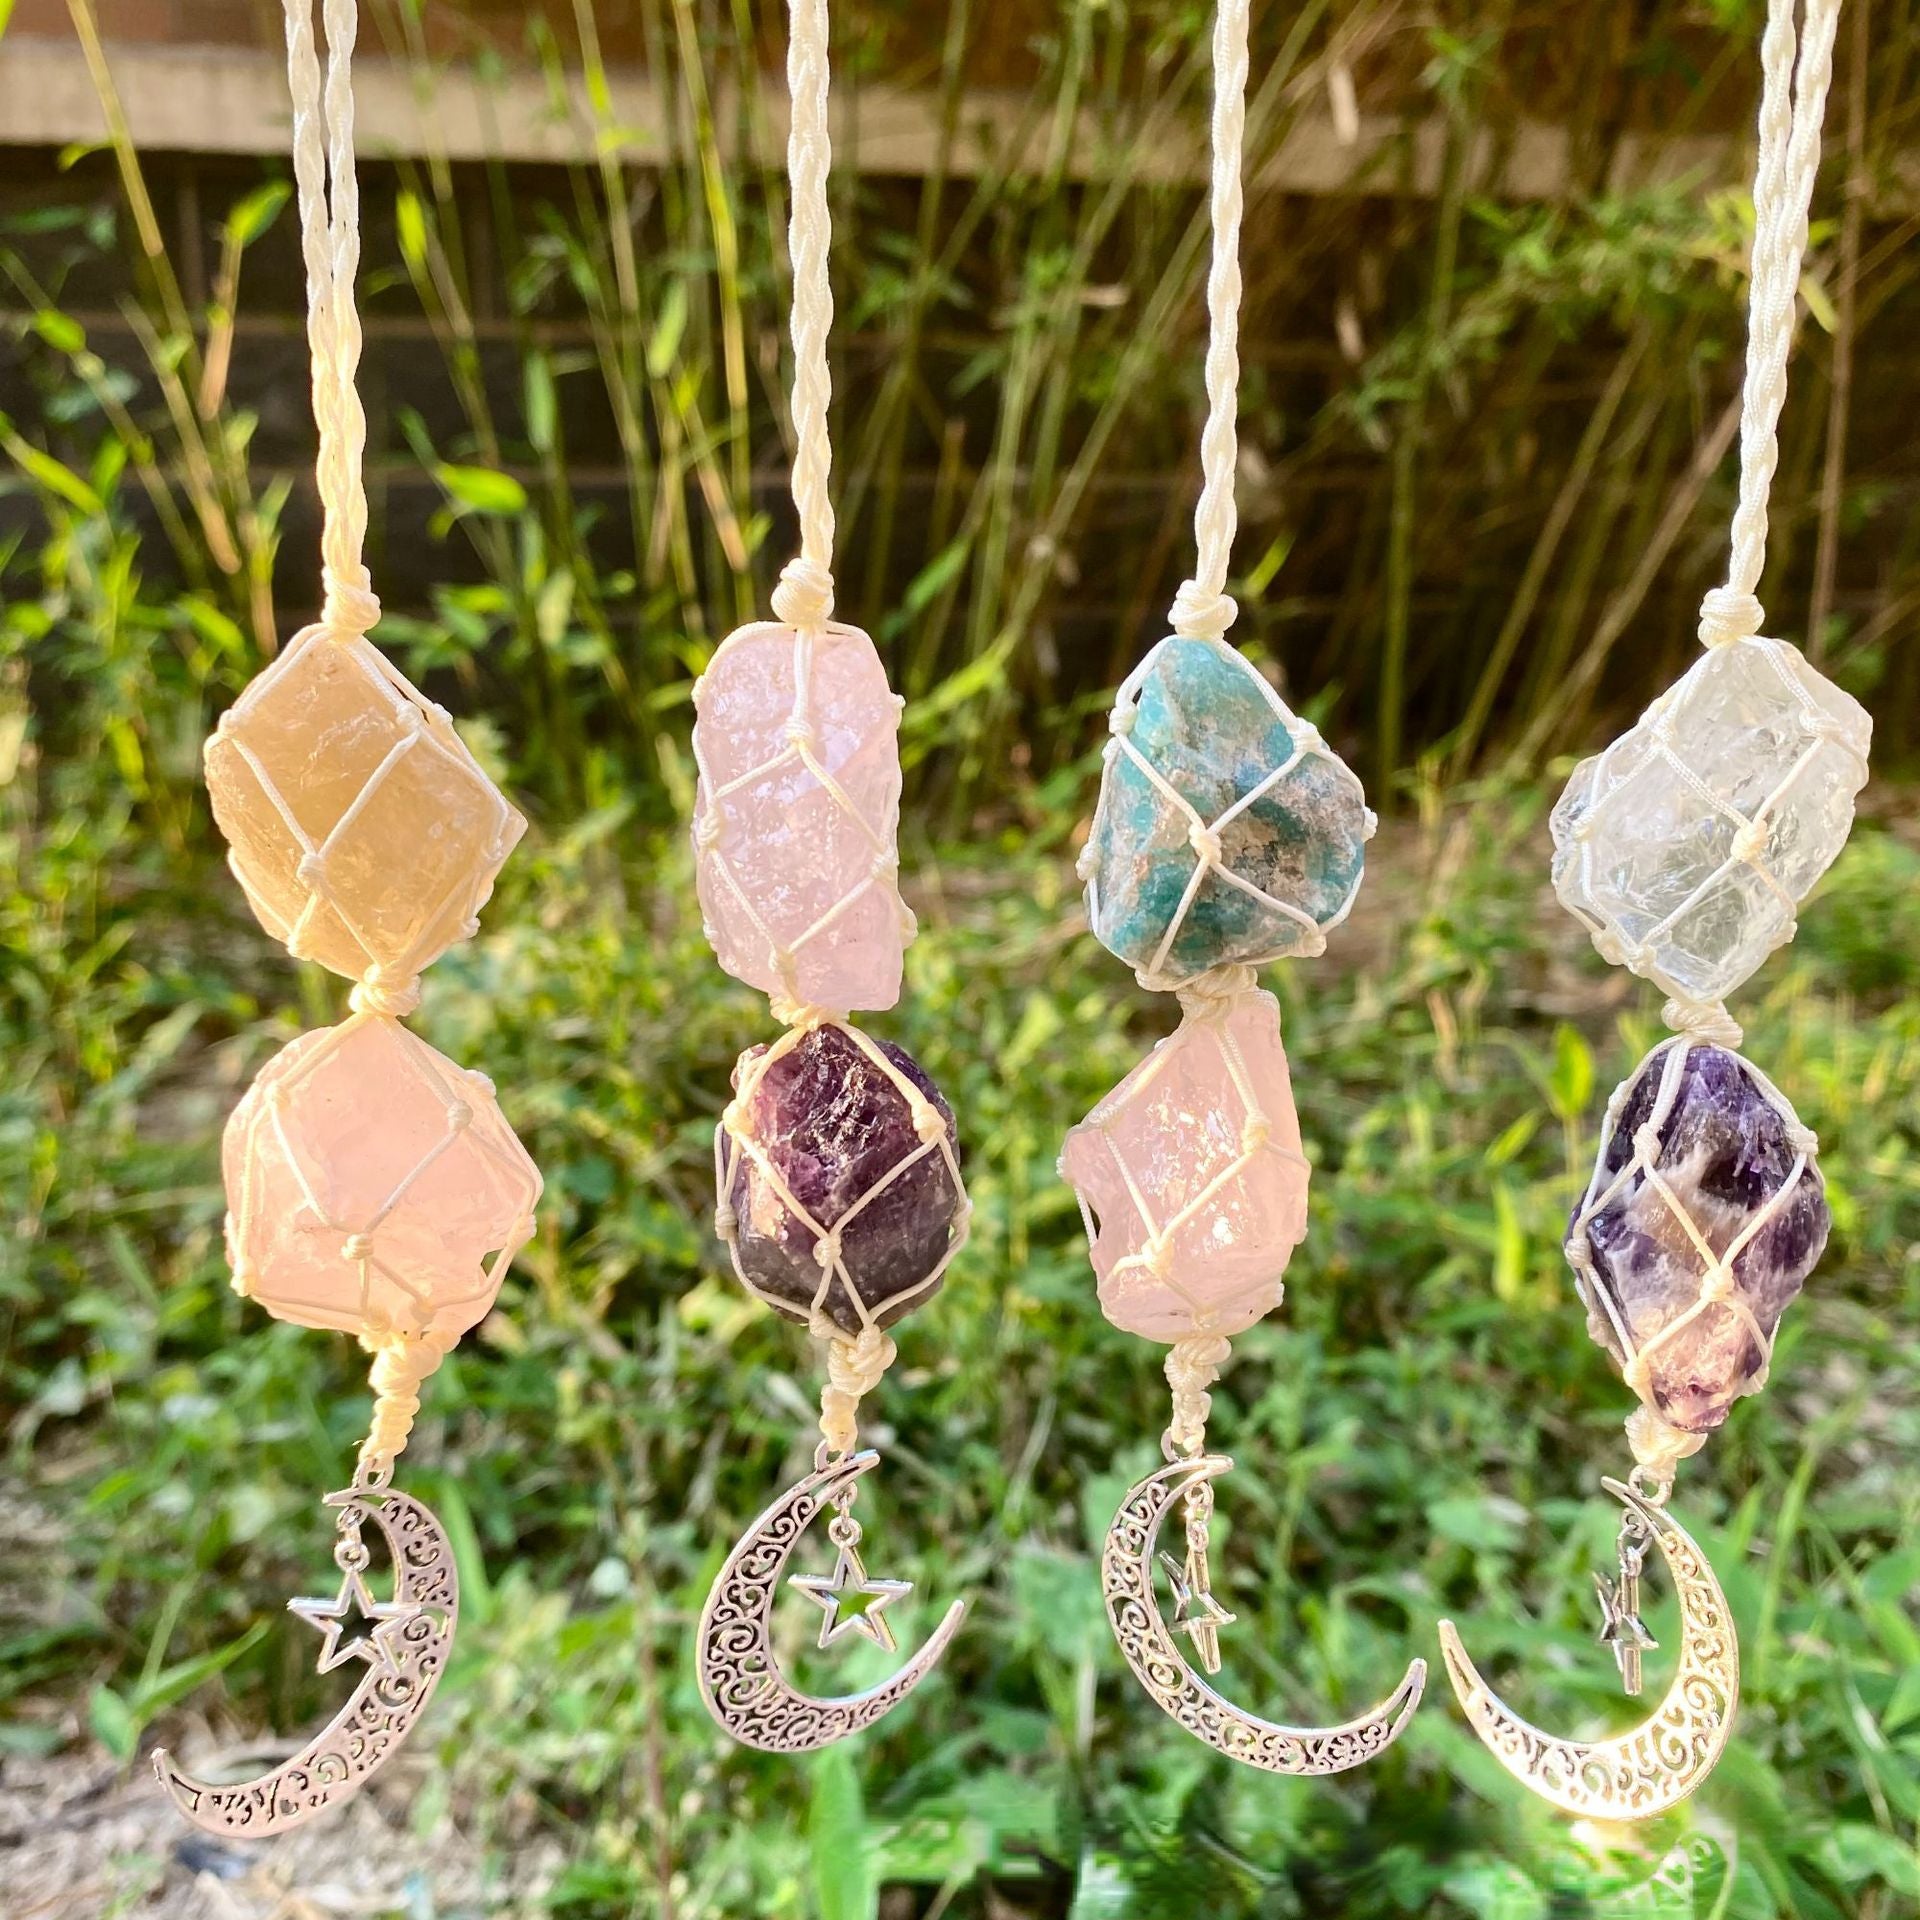 Hot Sale Natural Crystal Stone Automobile Hanging Ornament Handmade Woven Citrine Crystal Stone Hanging Ornament Energy Crystal